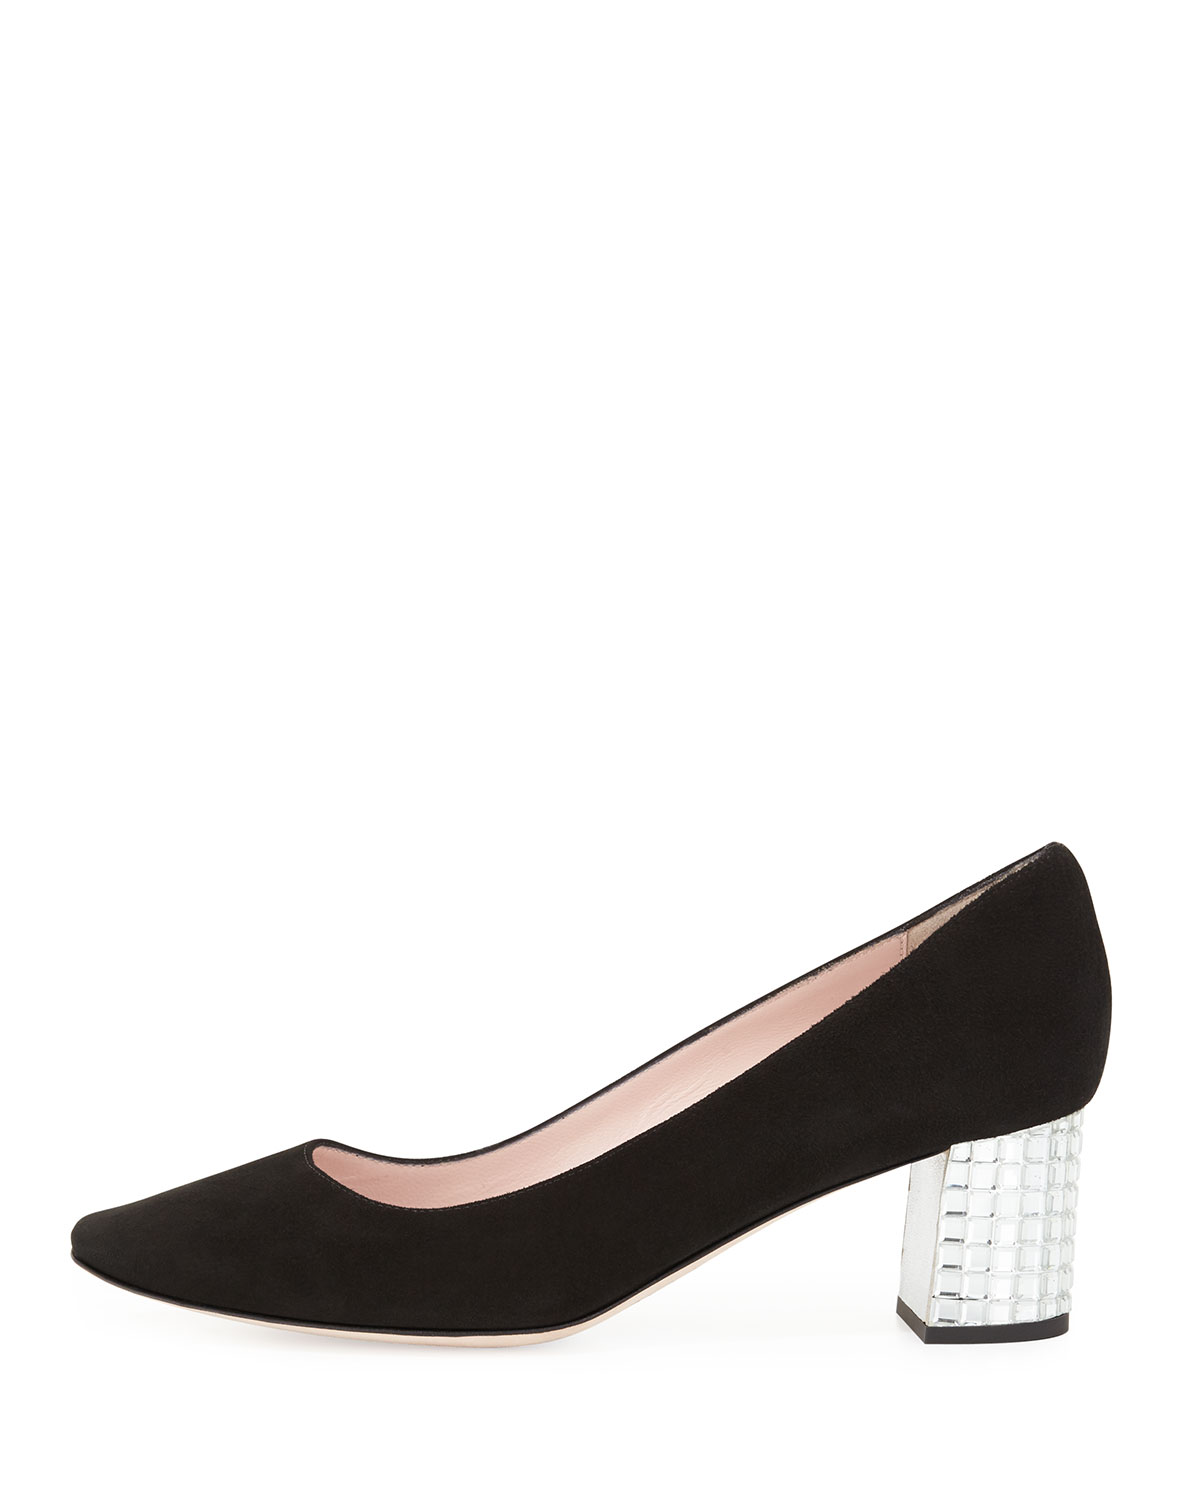  Grandma will try to steal these, be careful.  Kate Spade block heel pump, $350, at  Neiman Marcus .&nbsp;  